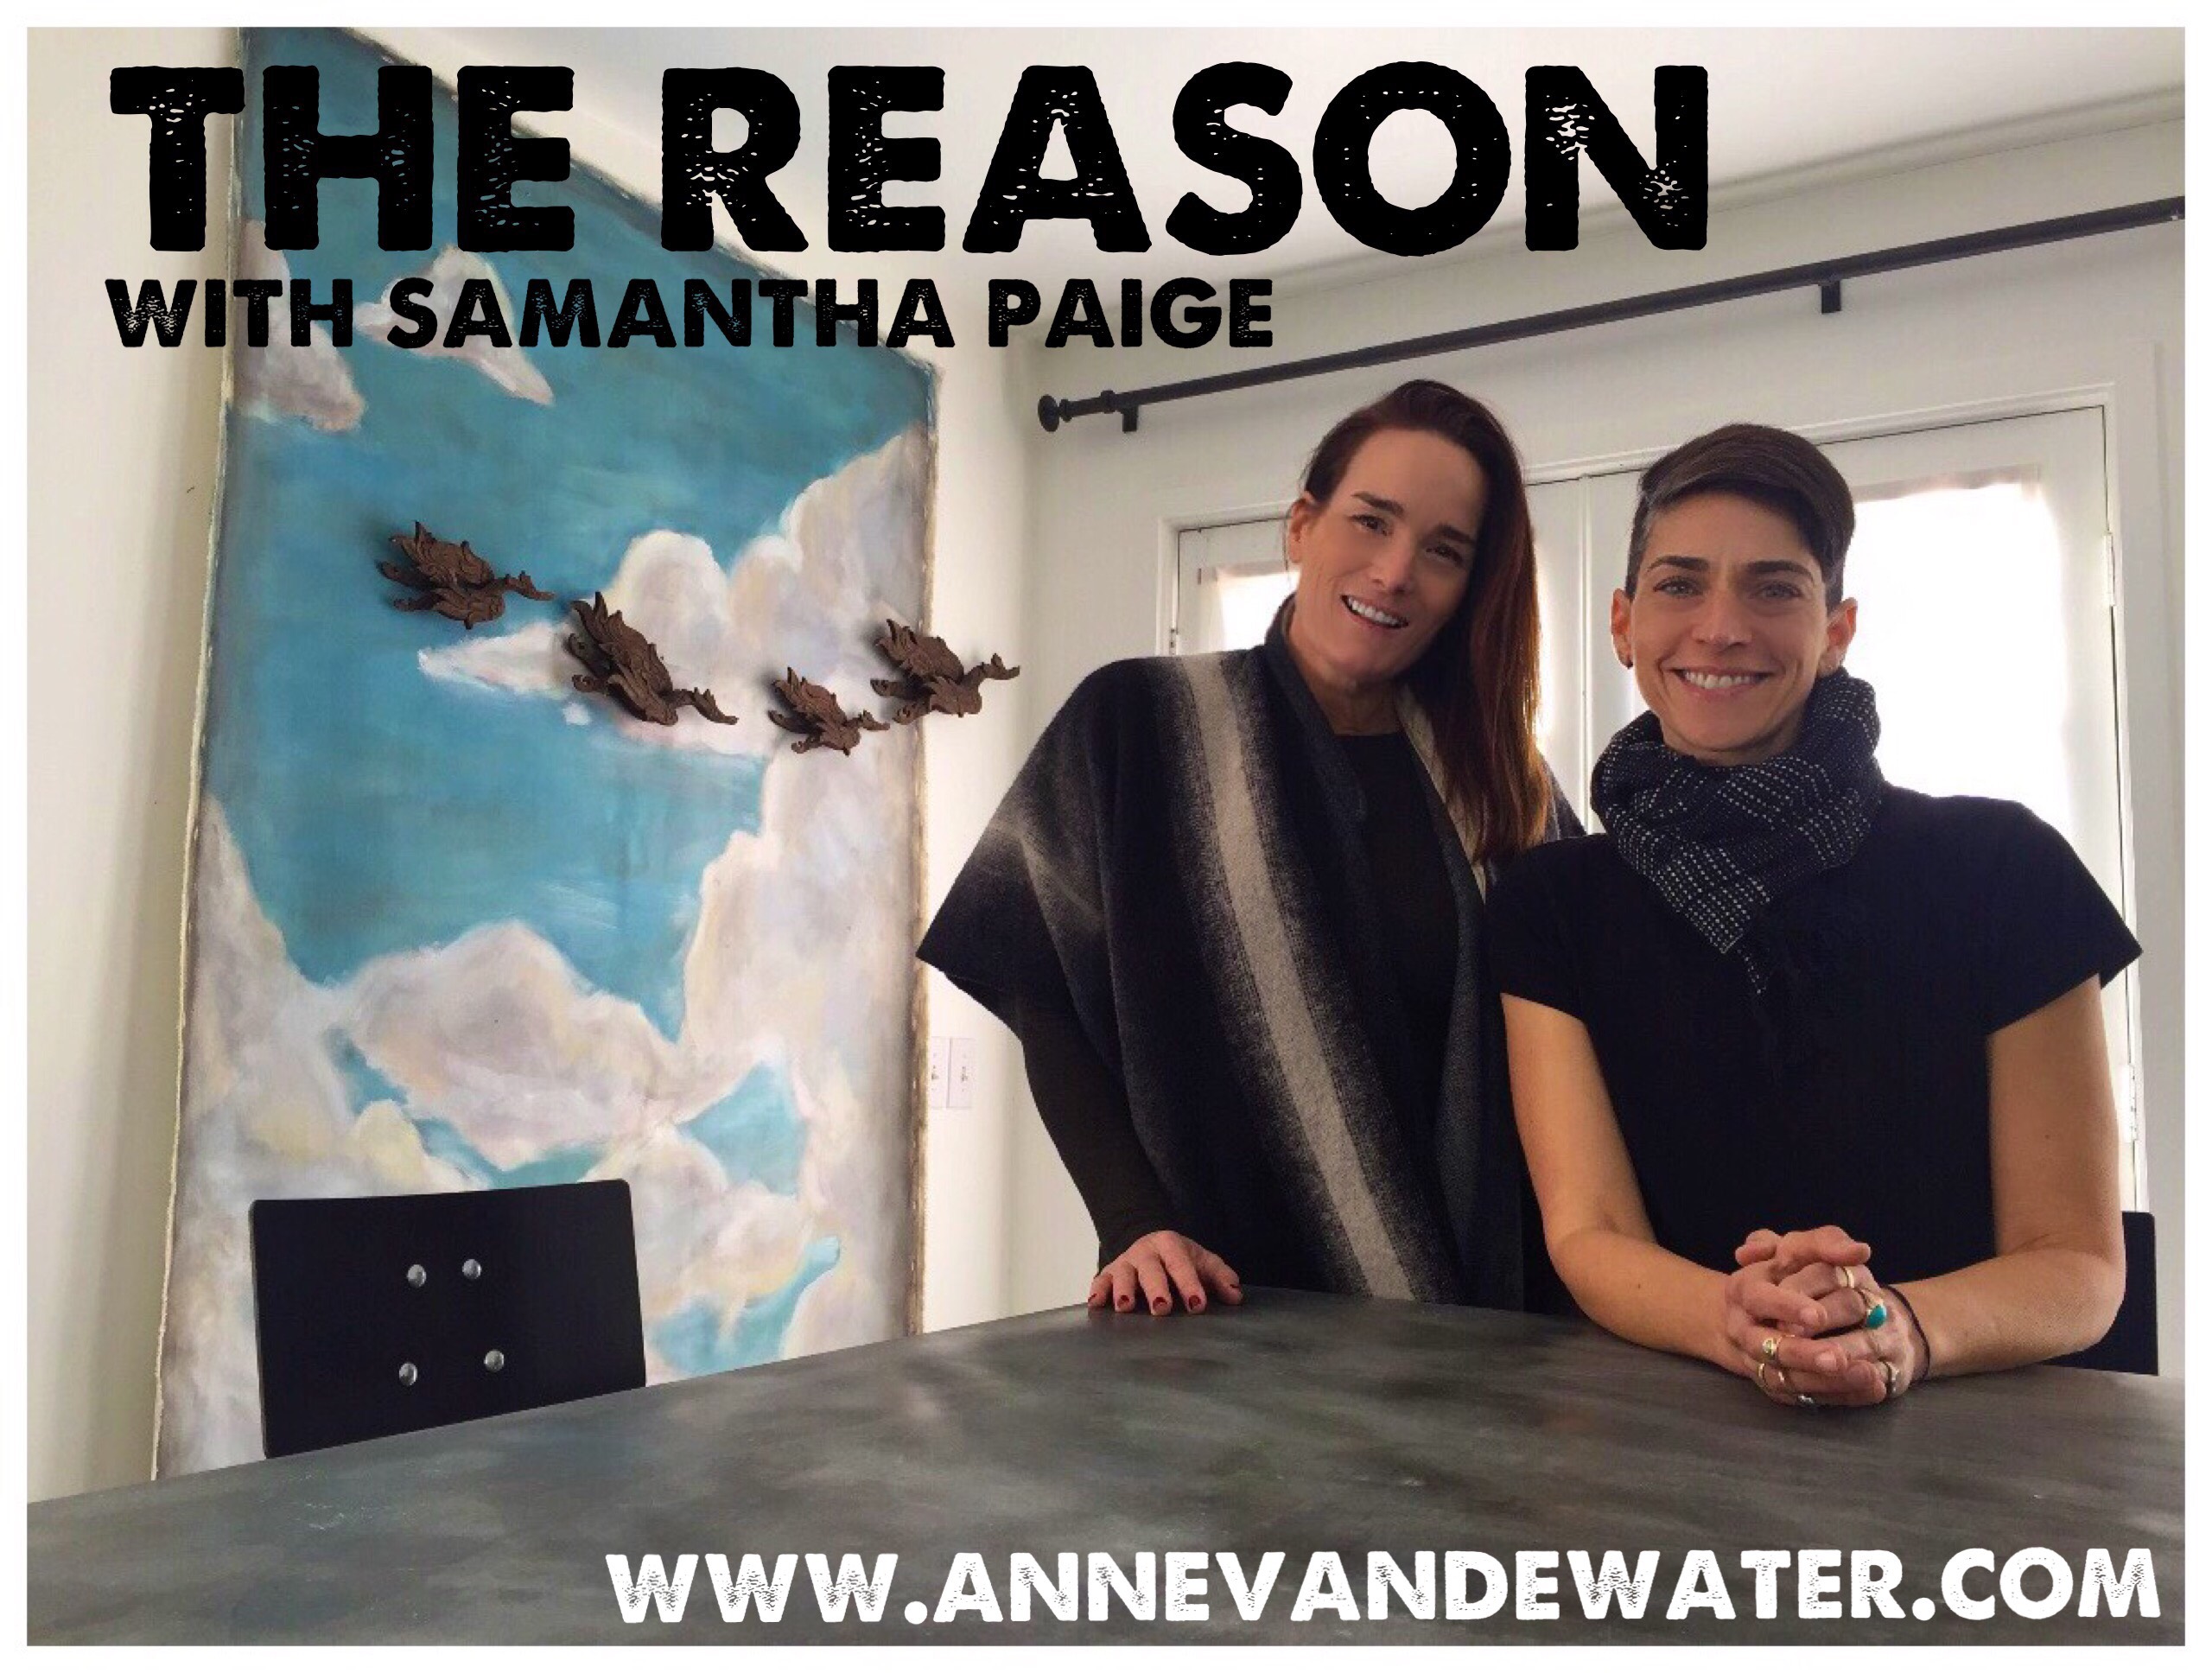 THE REASON INTERVIEW with Samantha Paige